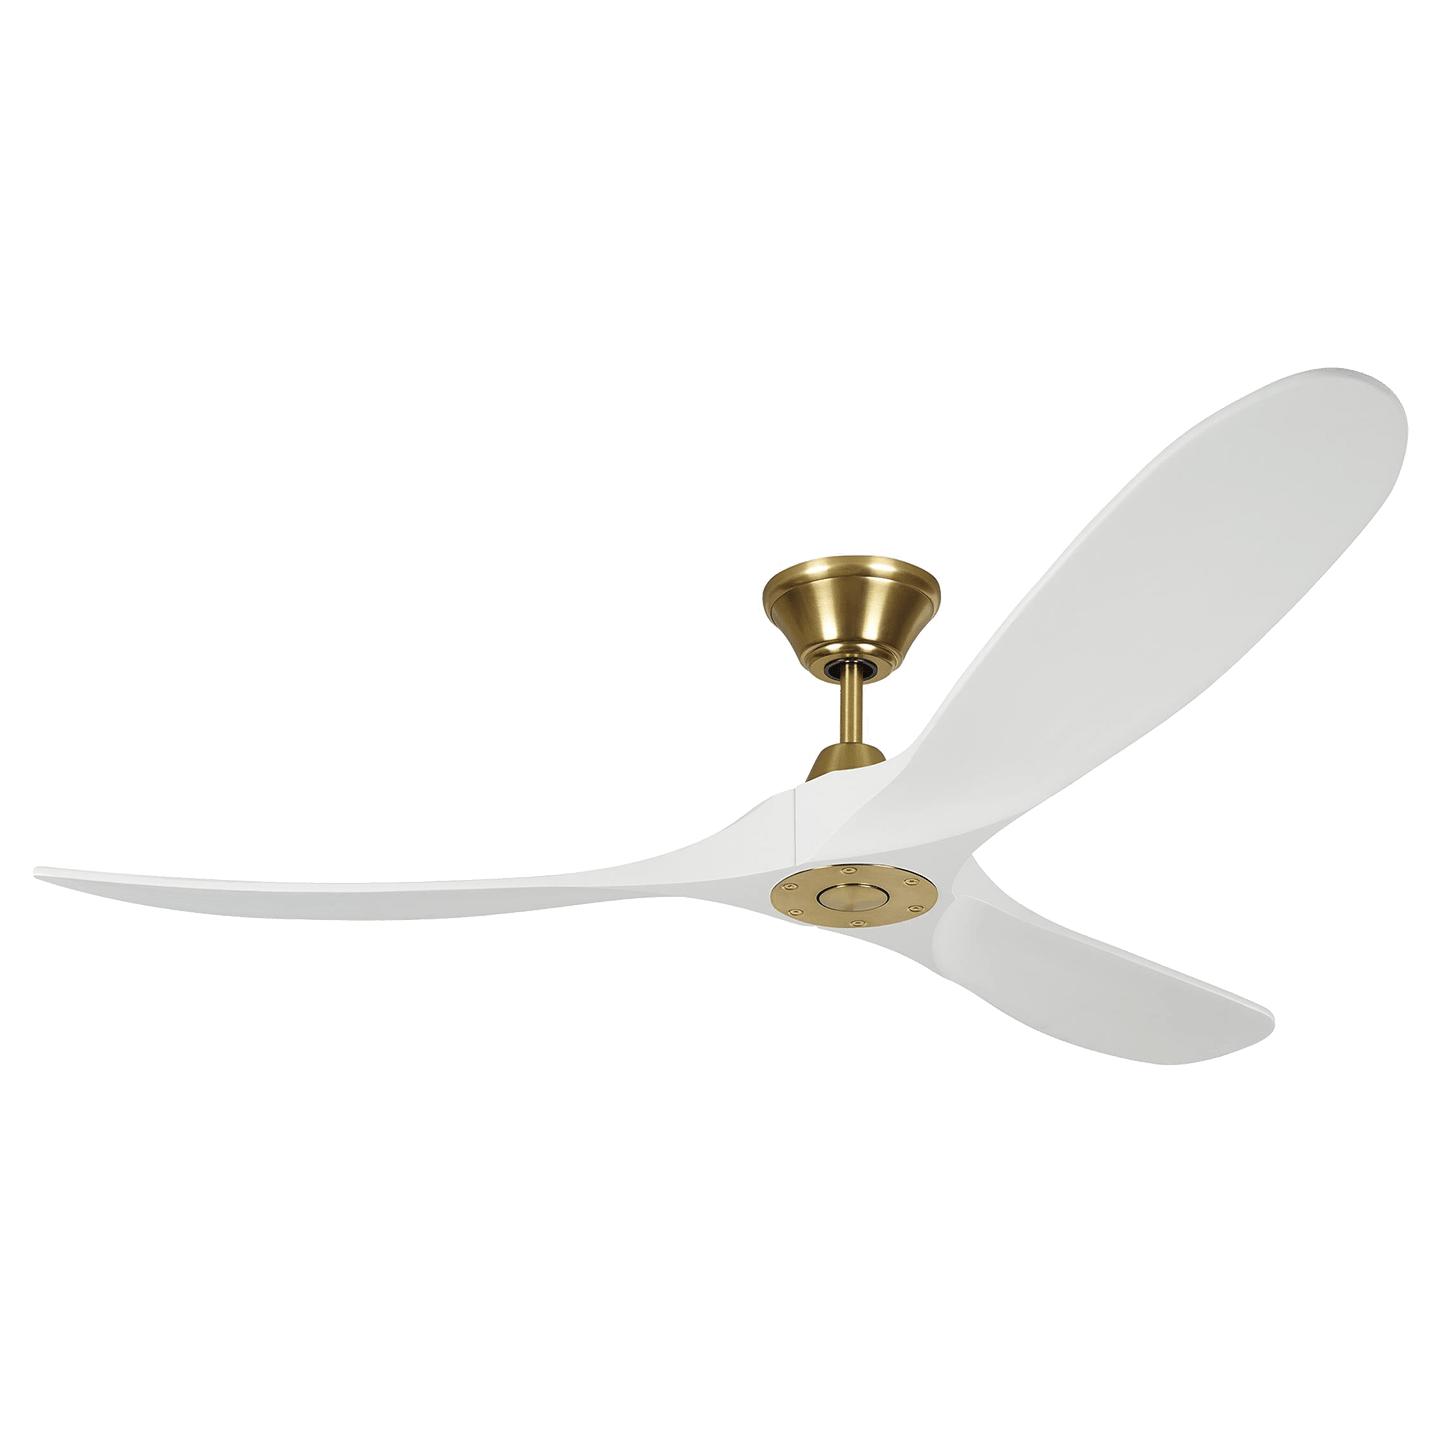 Burnished Brass Housing With Matte White Blades